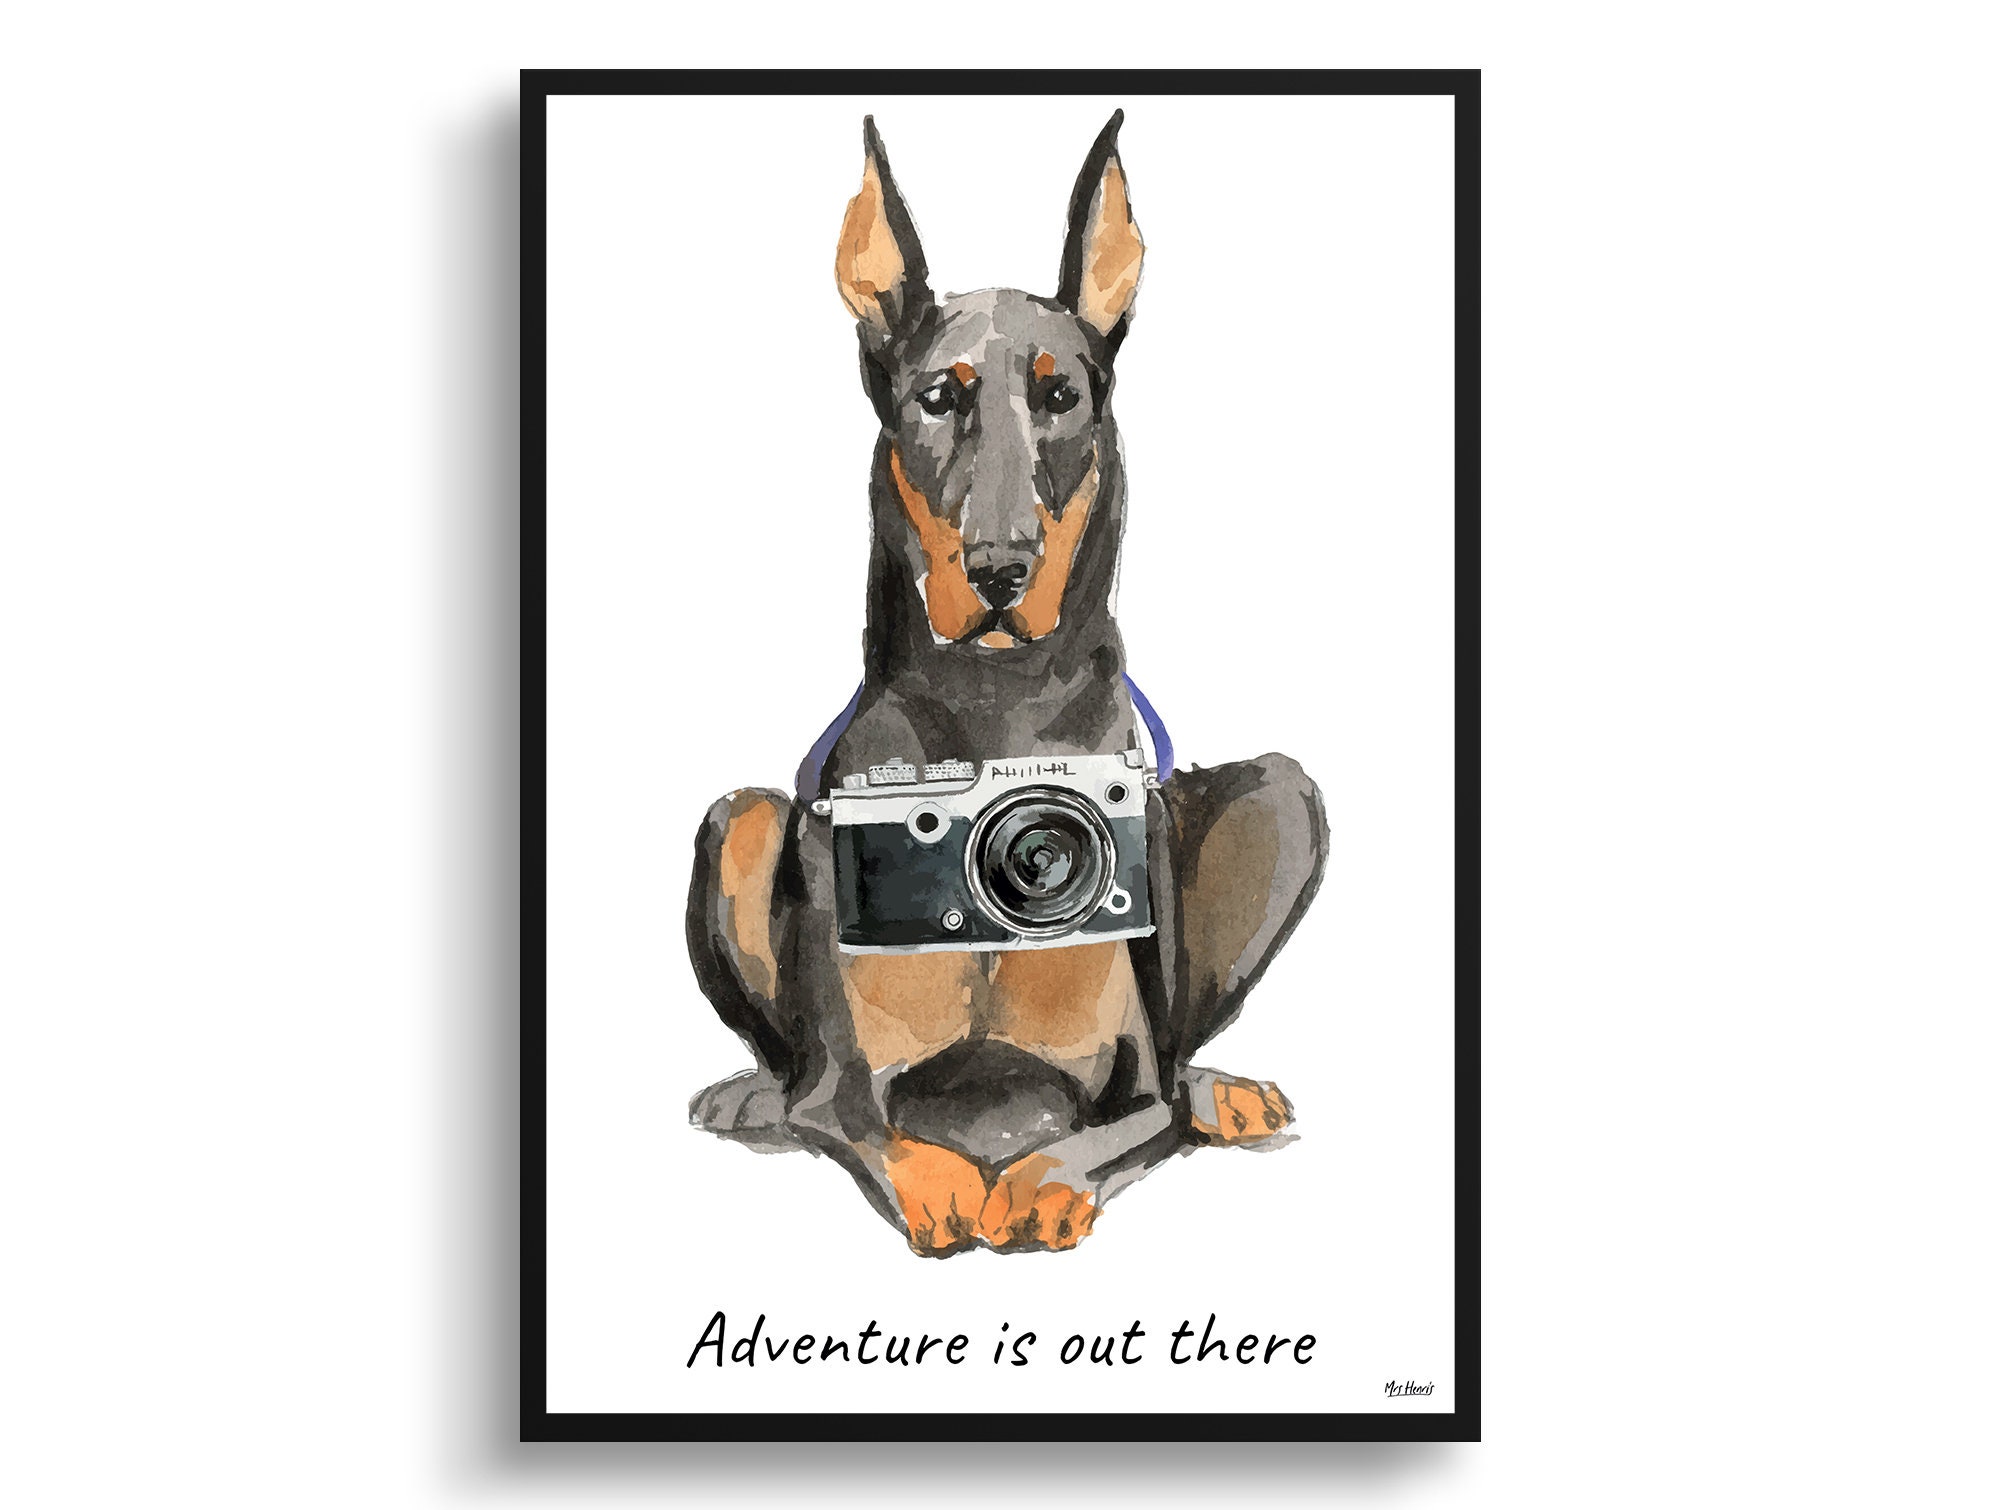 Adventure Is Out There Doberman Dog Print Illustration. Framed & Un-Framed Wall Art Options. Personalised Name